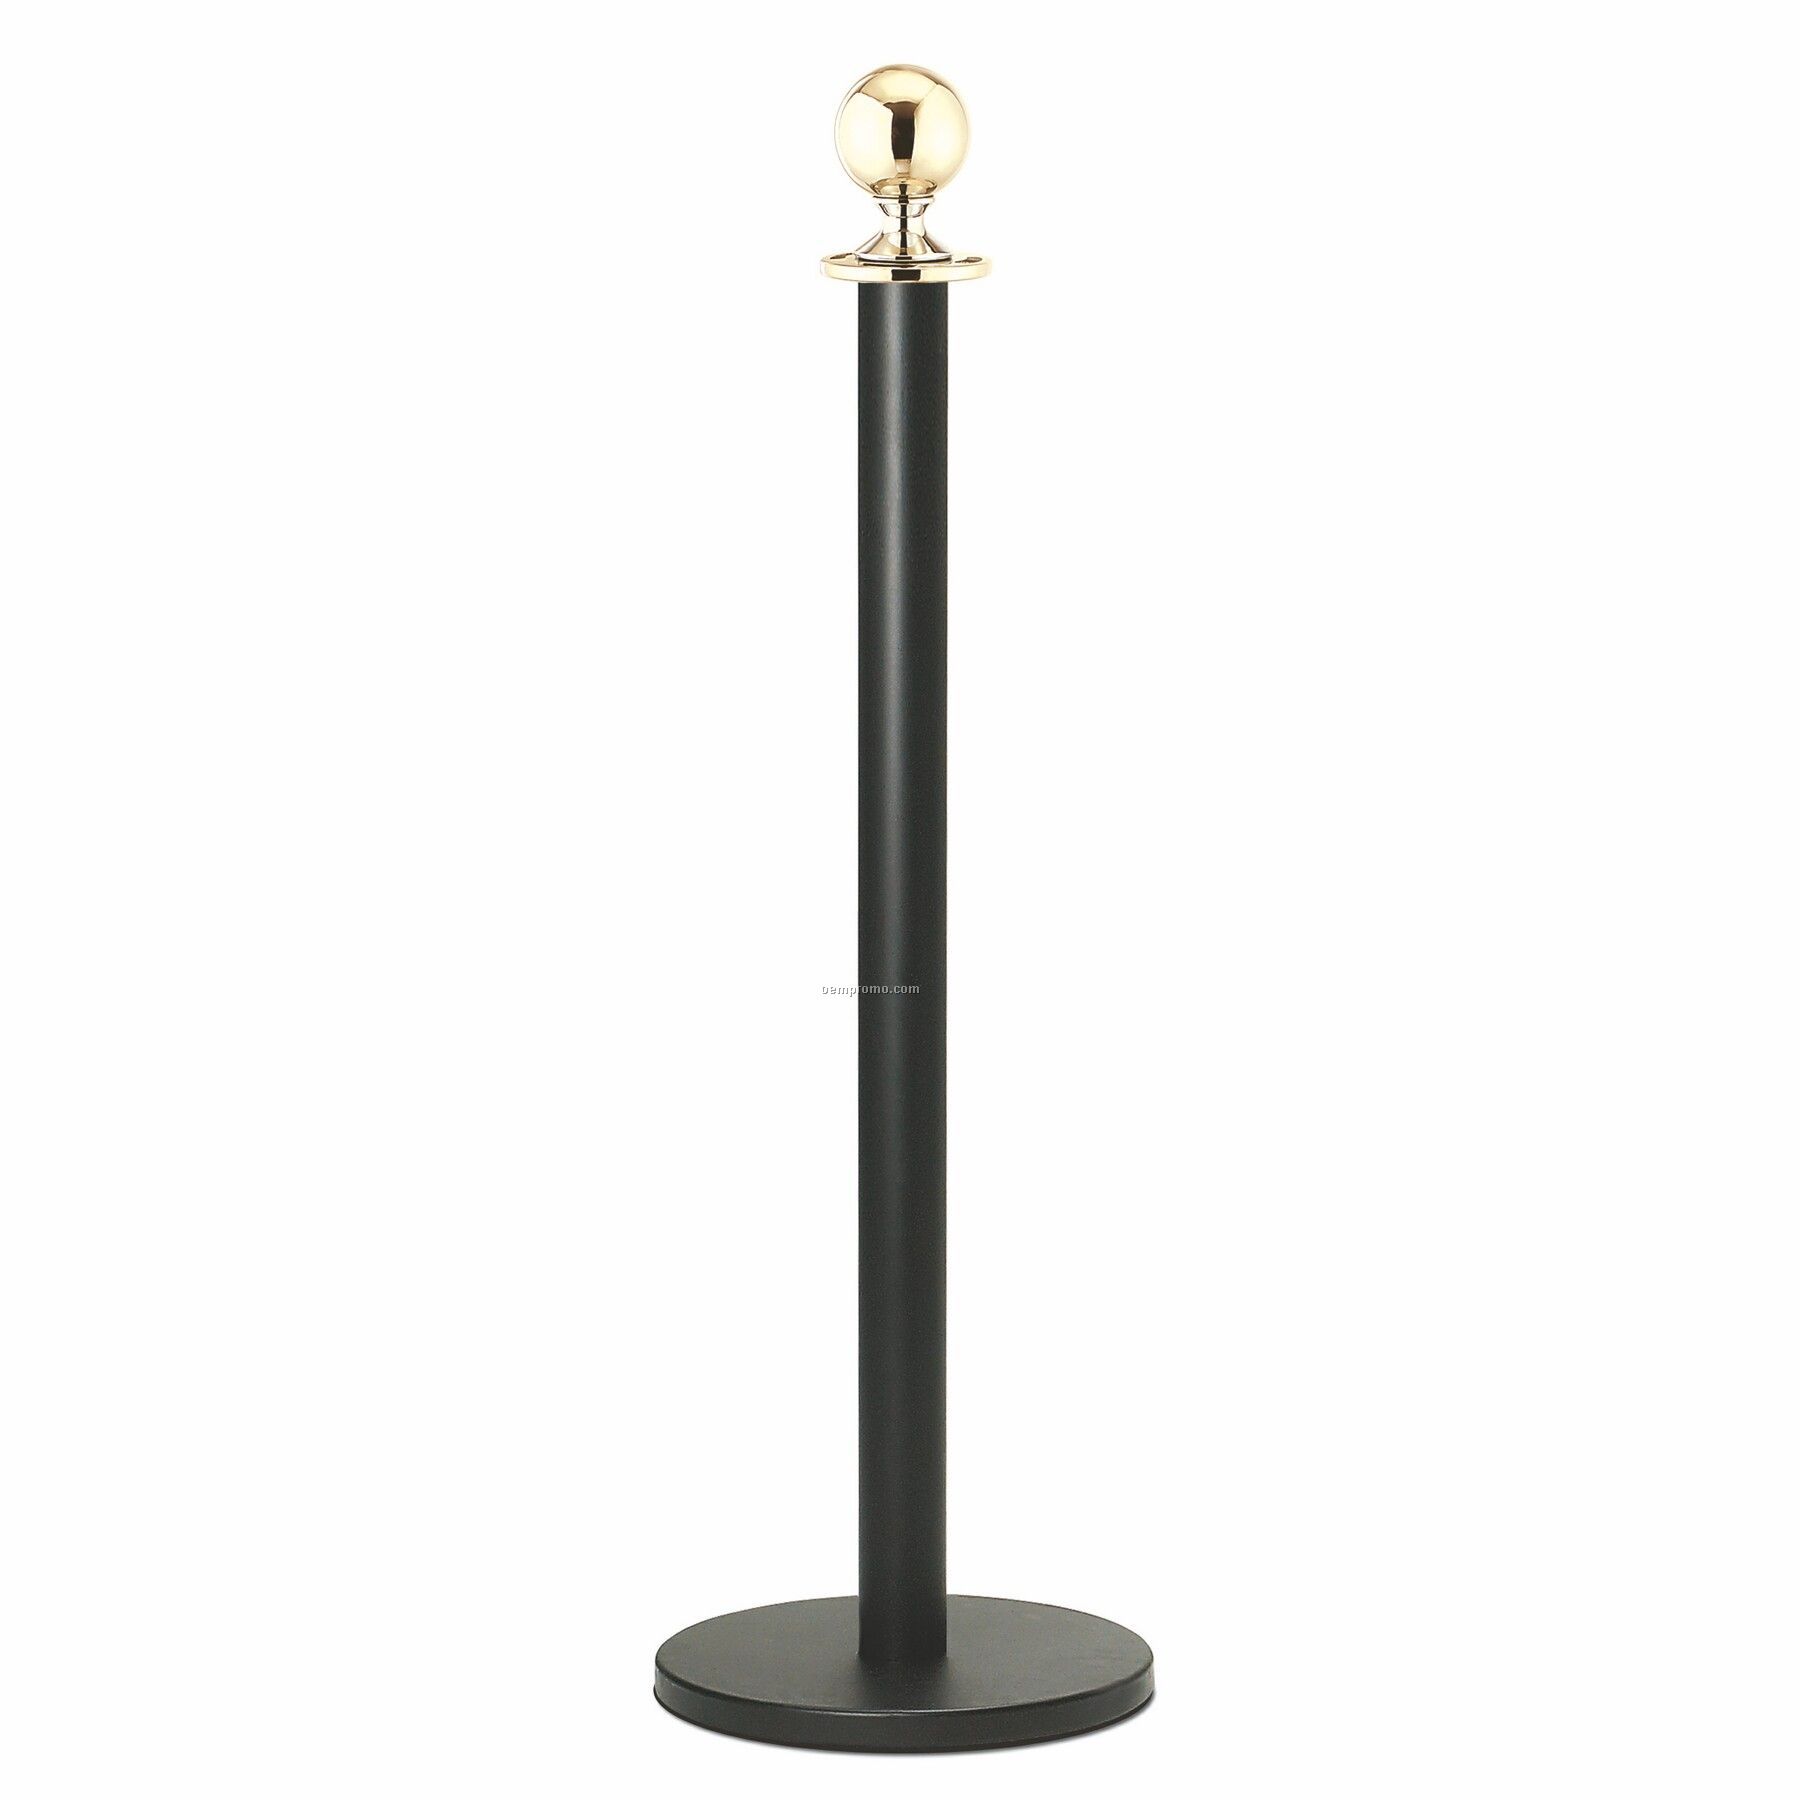 Guidelines Rope Stanchion - Black Pole & Base With Ball Top